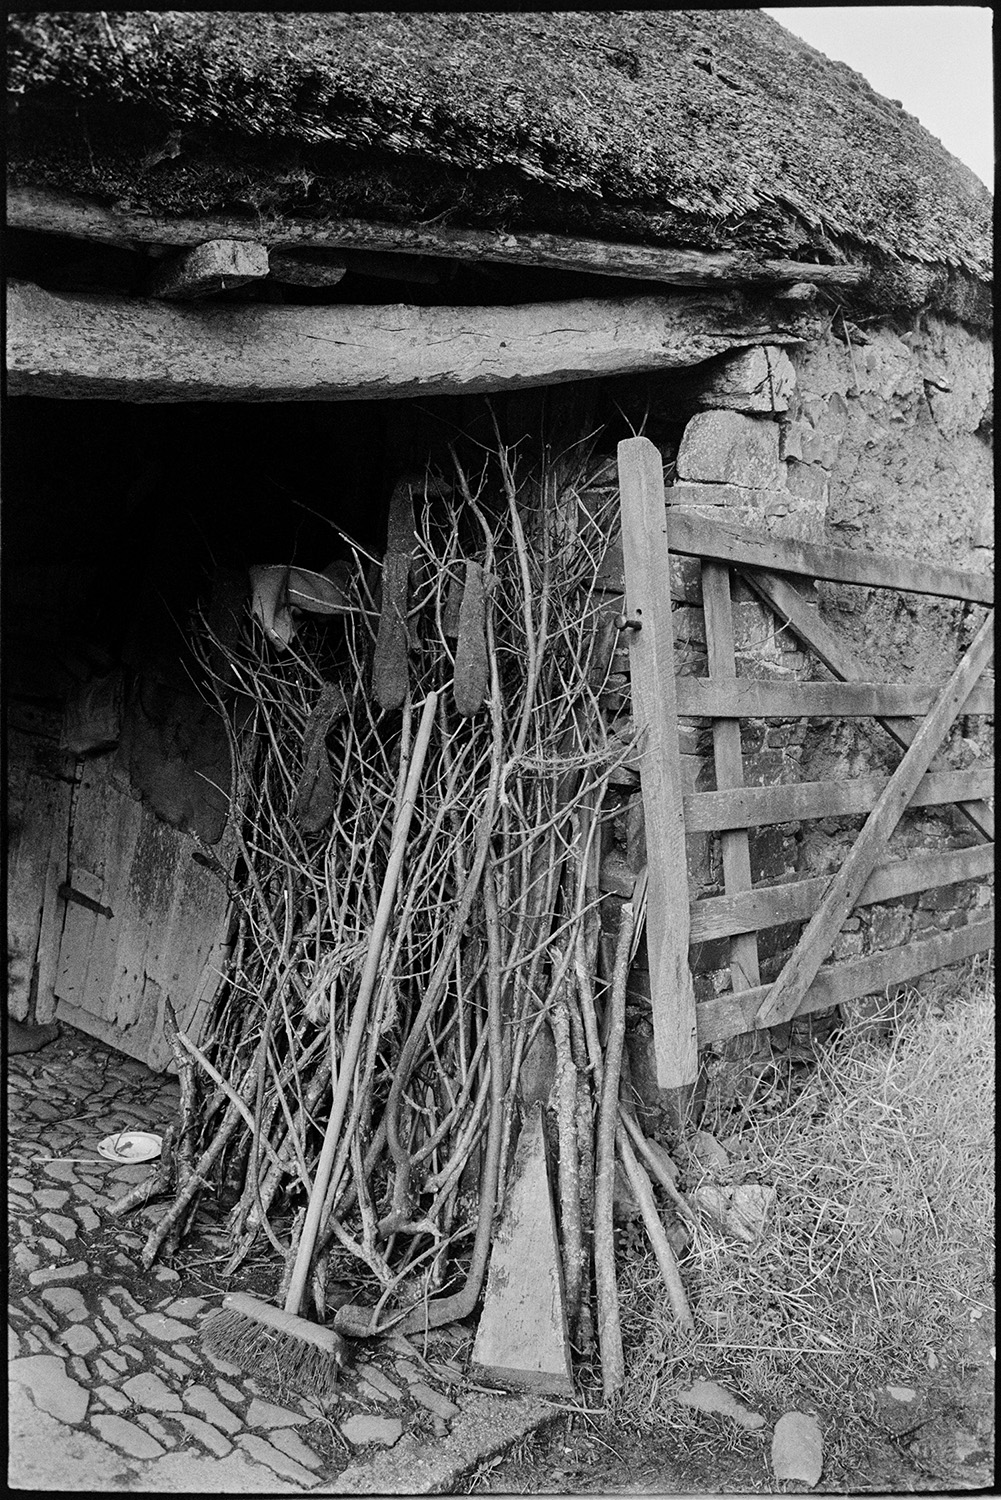 Socks hanging to dry on stack of kindling in barn. 
[Socks hung on kindling to dry in a thatched barn at Bridgetown, Iddesleigh. A brush is also lent against the branches, and a field gate is propped against the barn wall.]